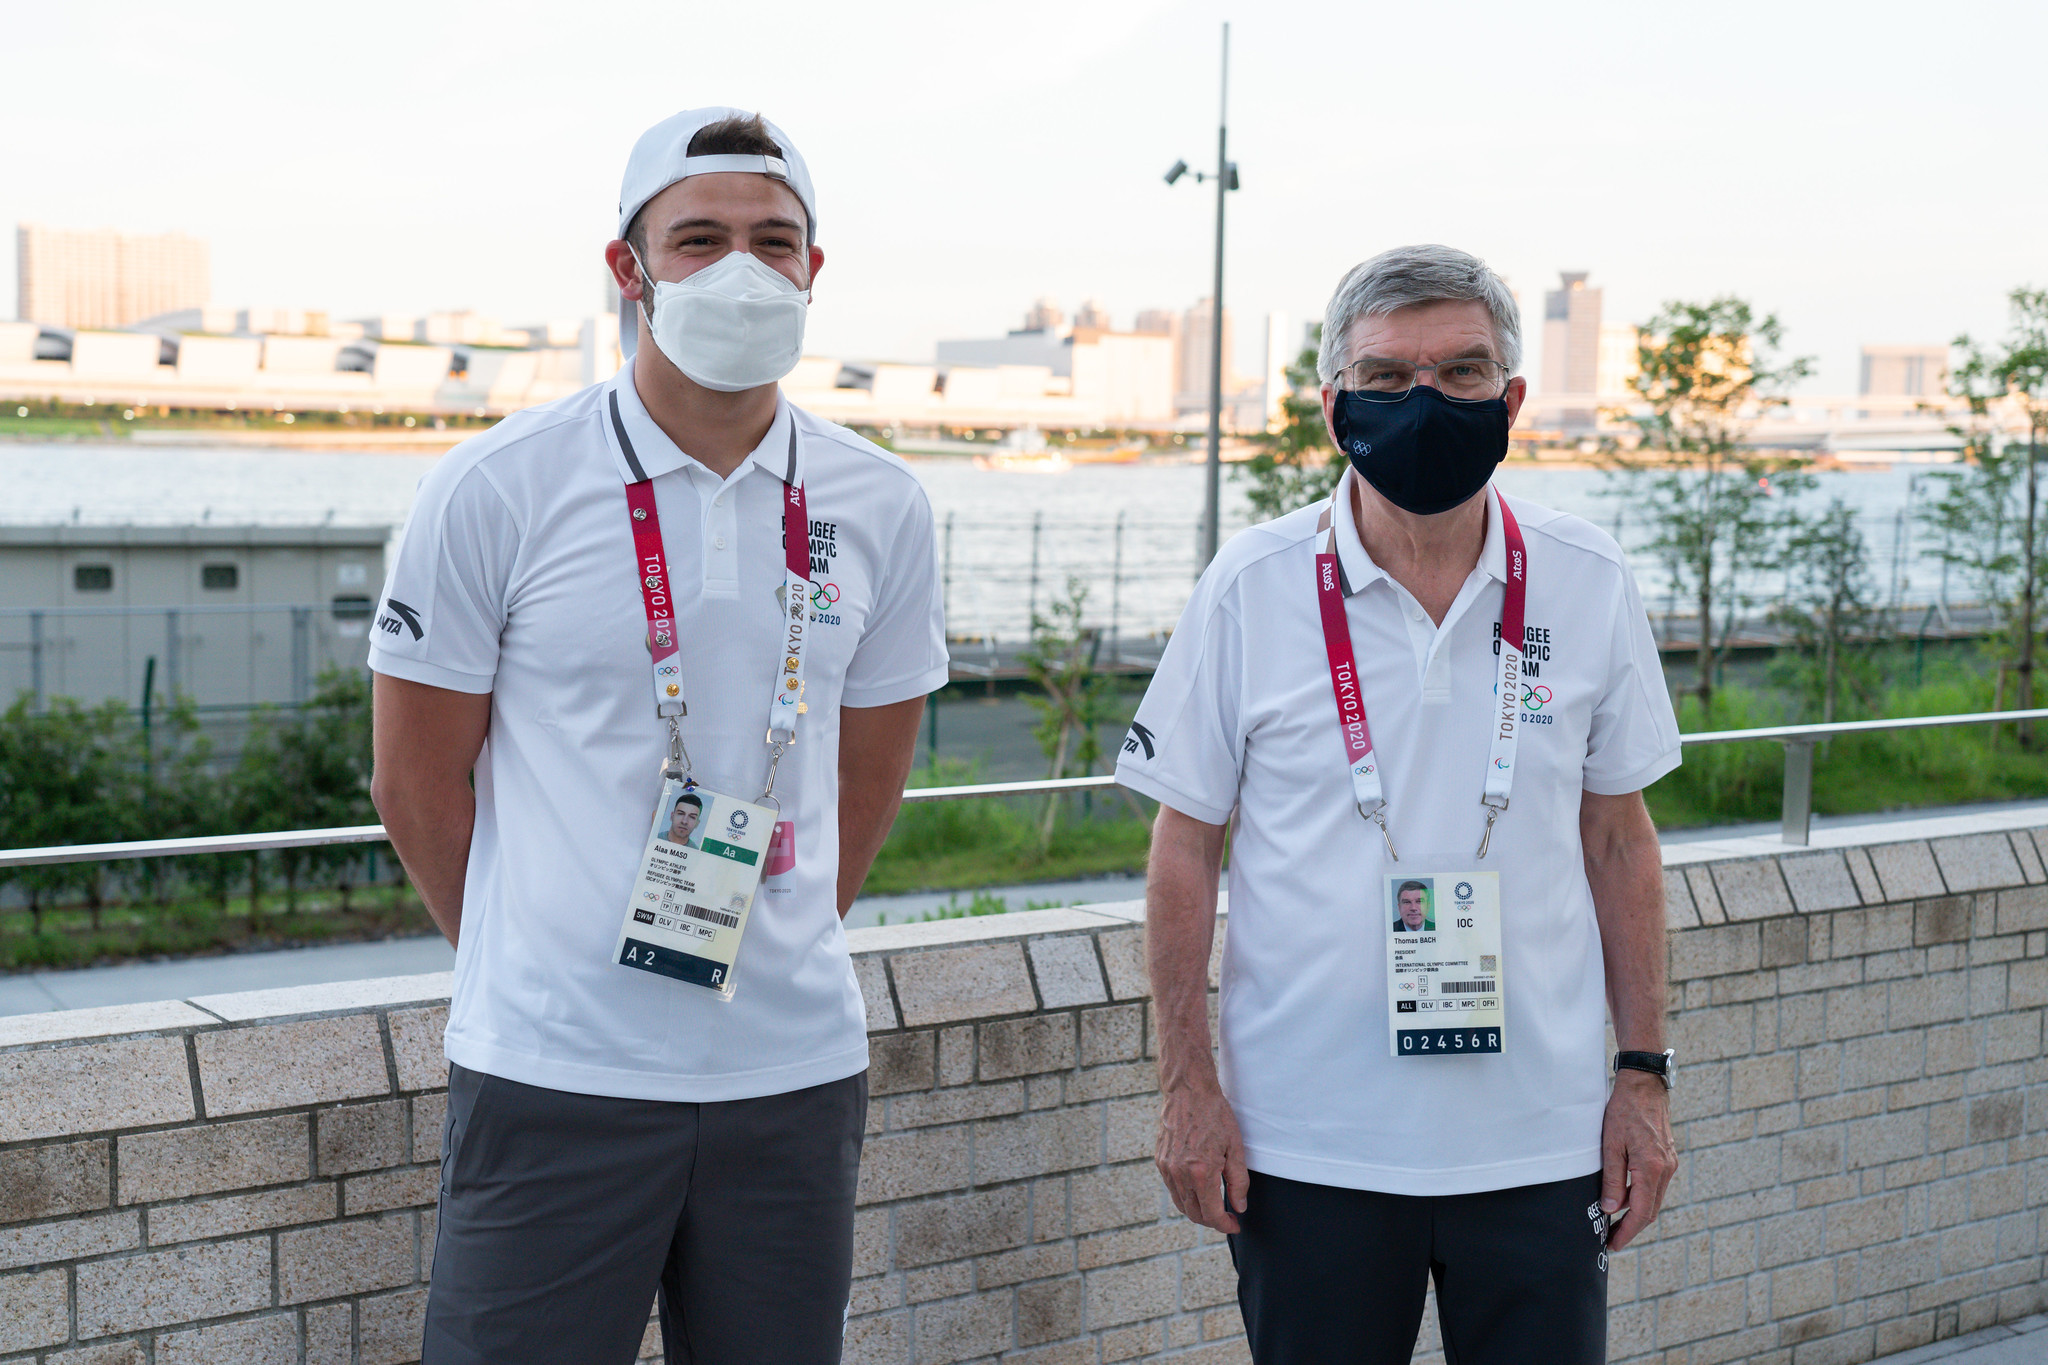 The IOC had come under pressure over its uniforms due to fears they were made using forced labour ©IOC